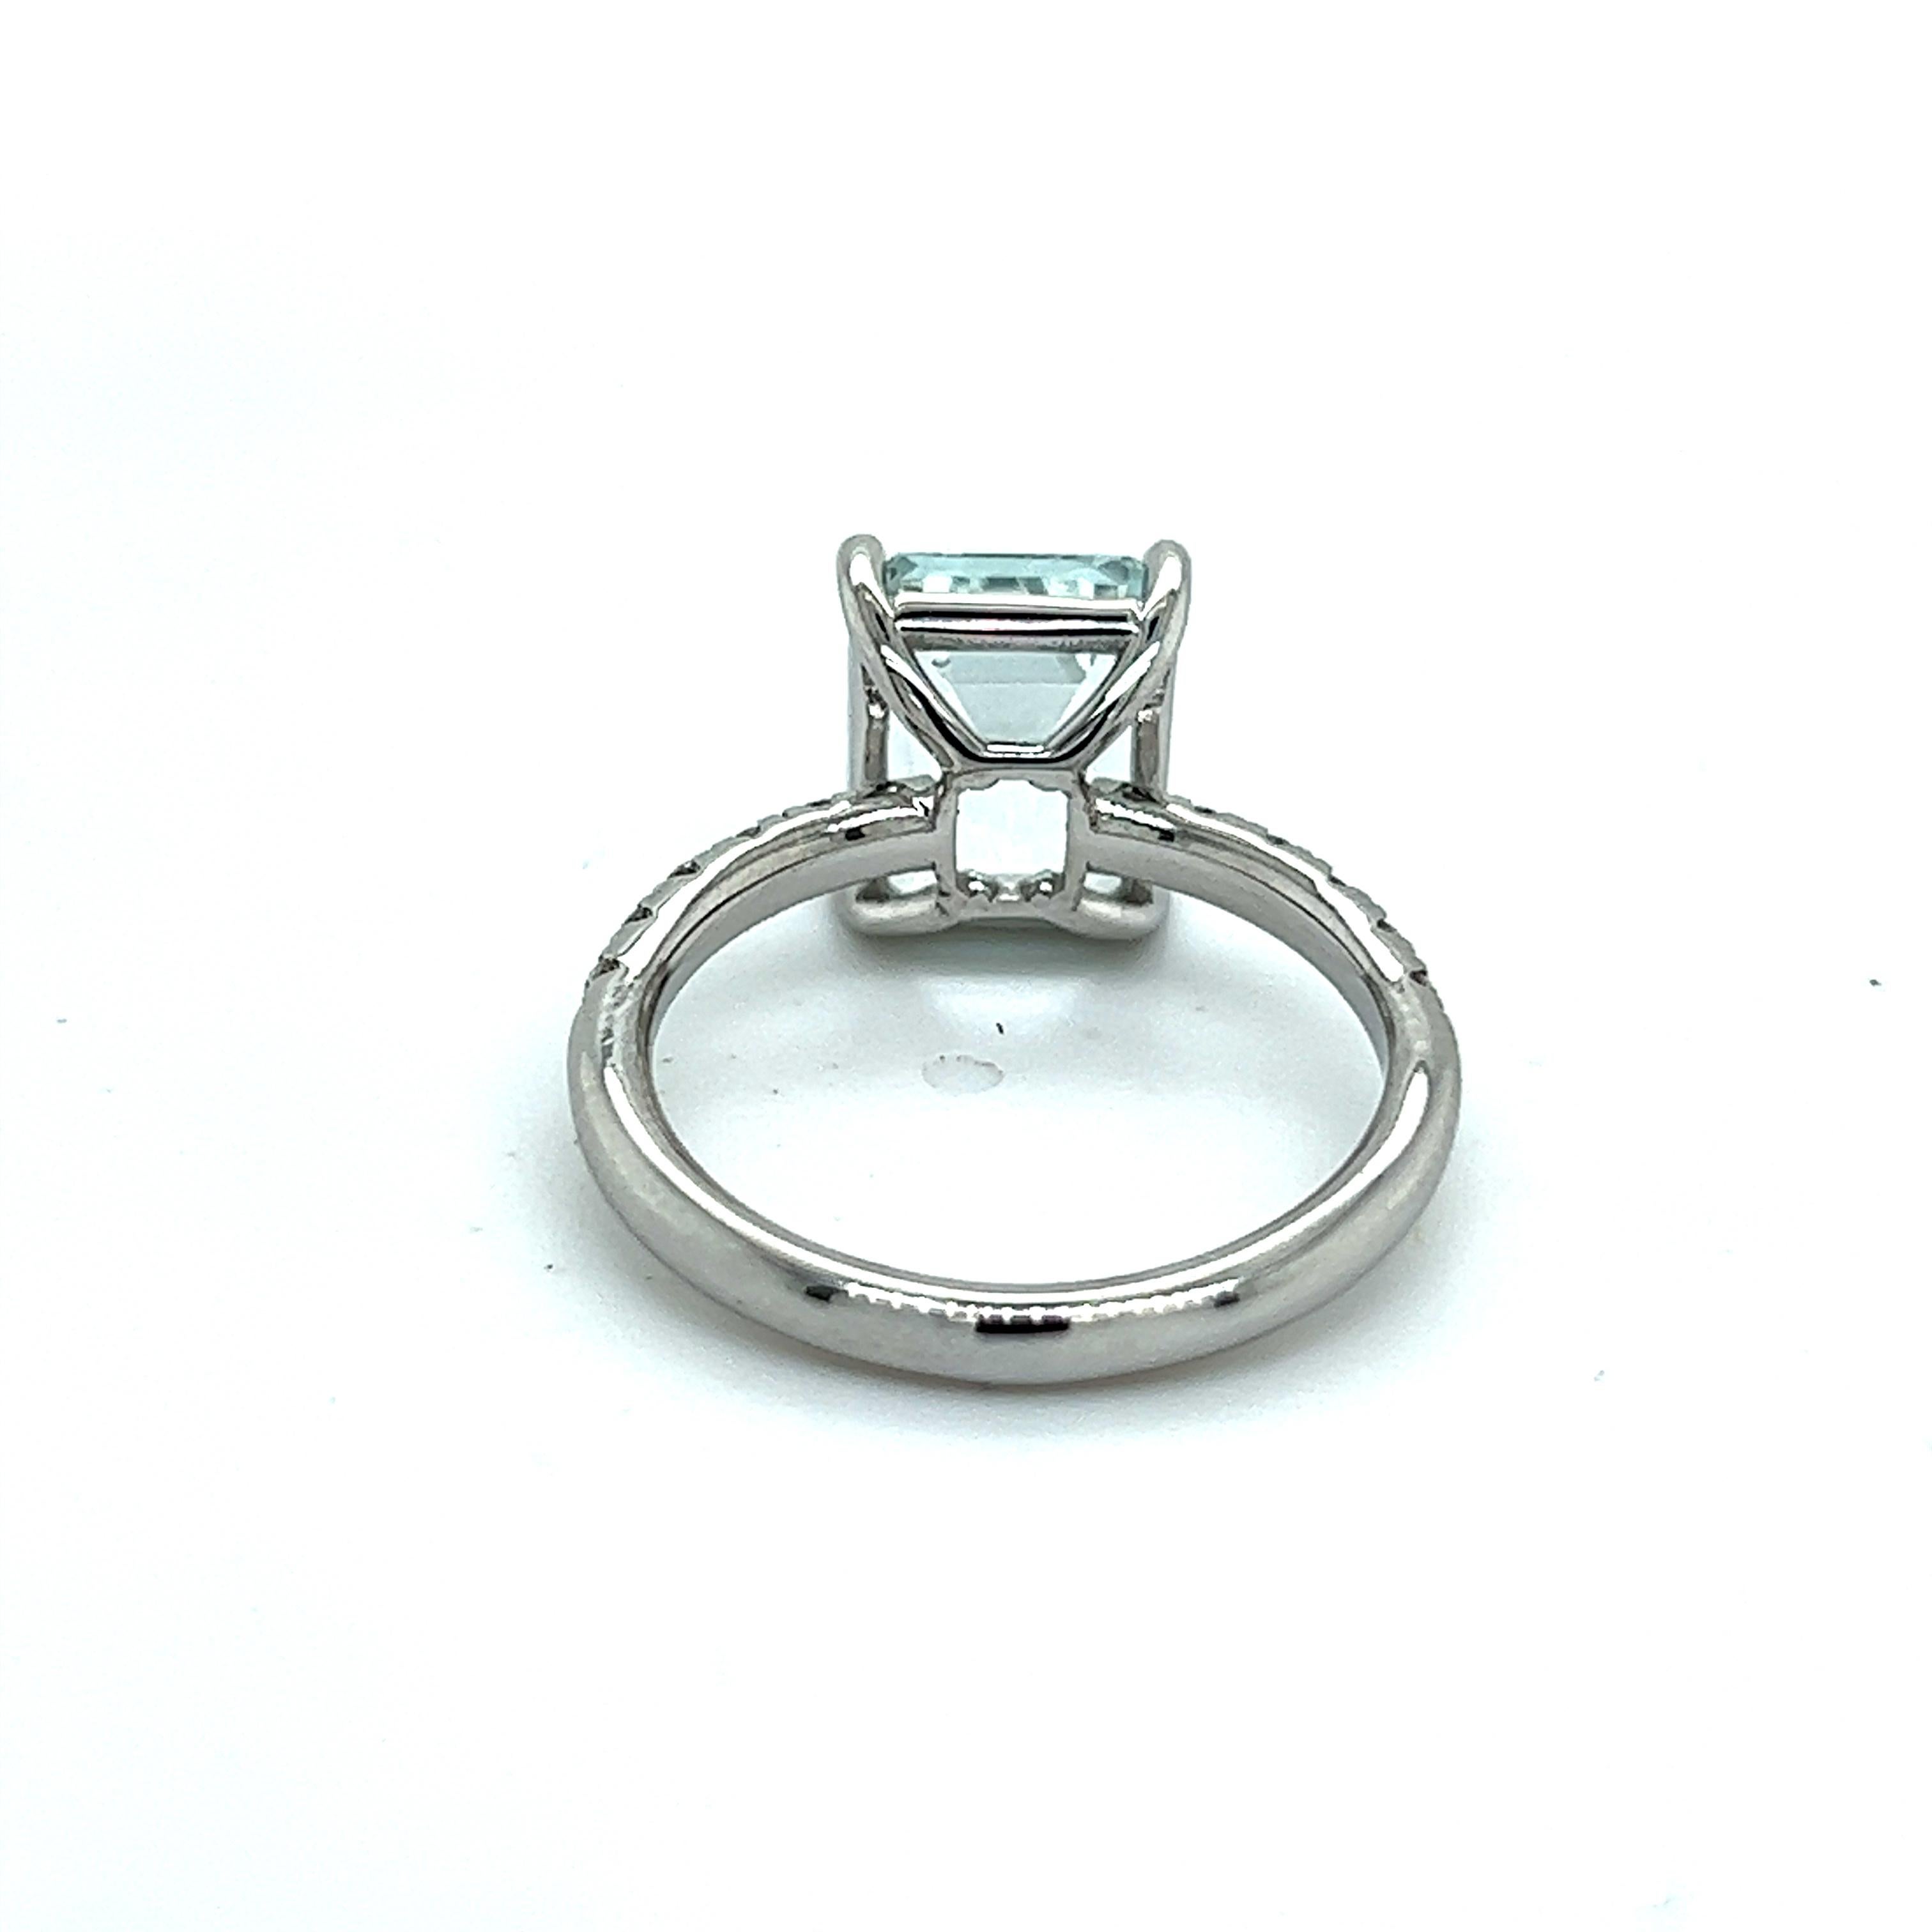 Natural Aquamarine Diamond Ring 14k W Gold 3.29 TCW Certified For Sale 2